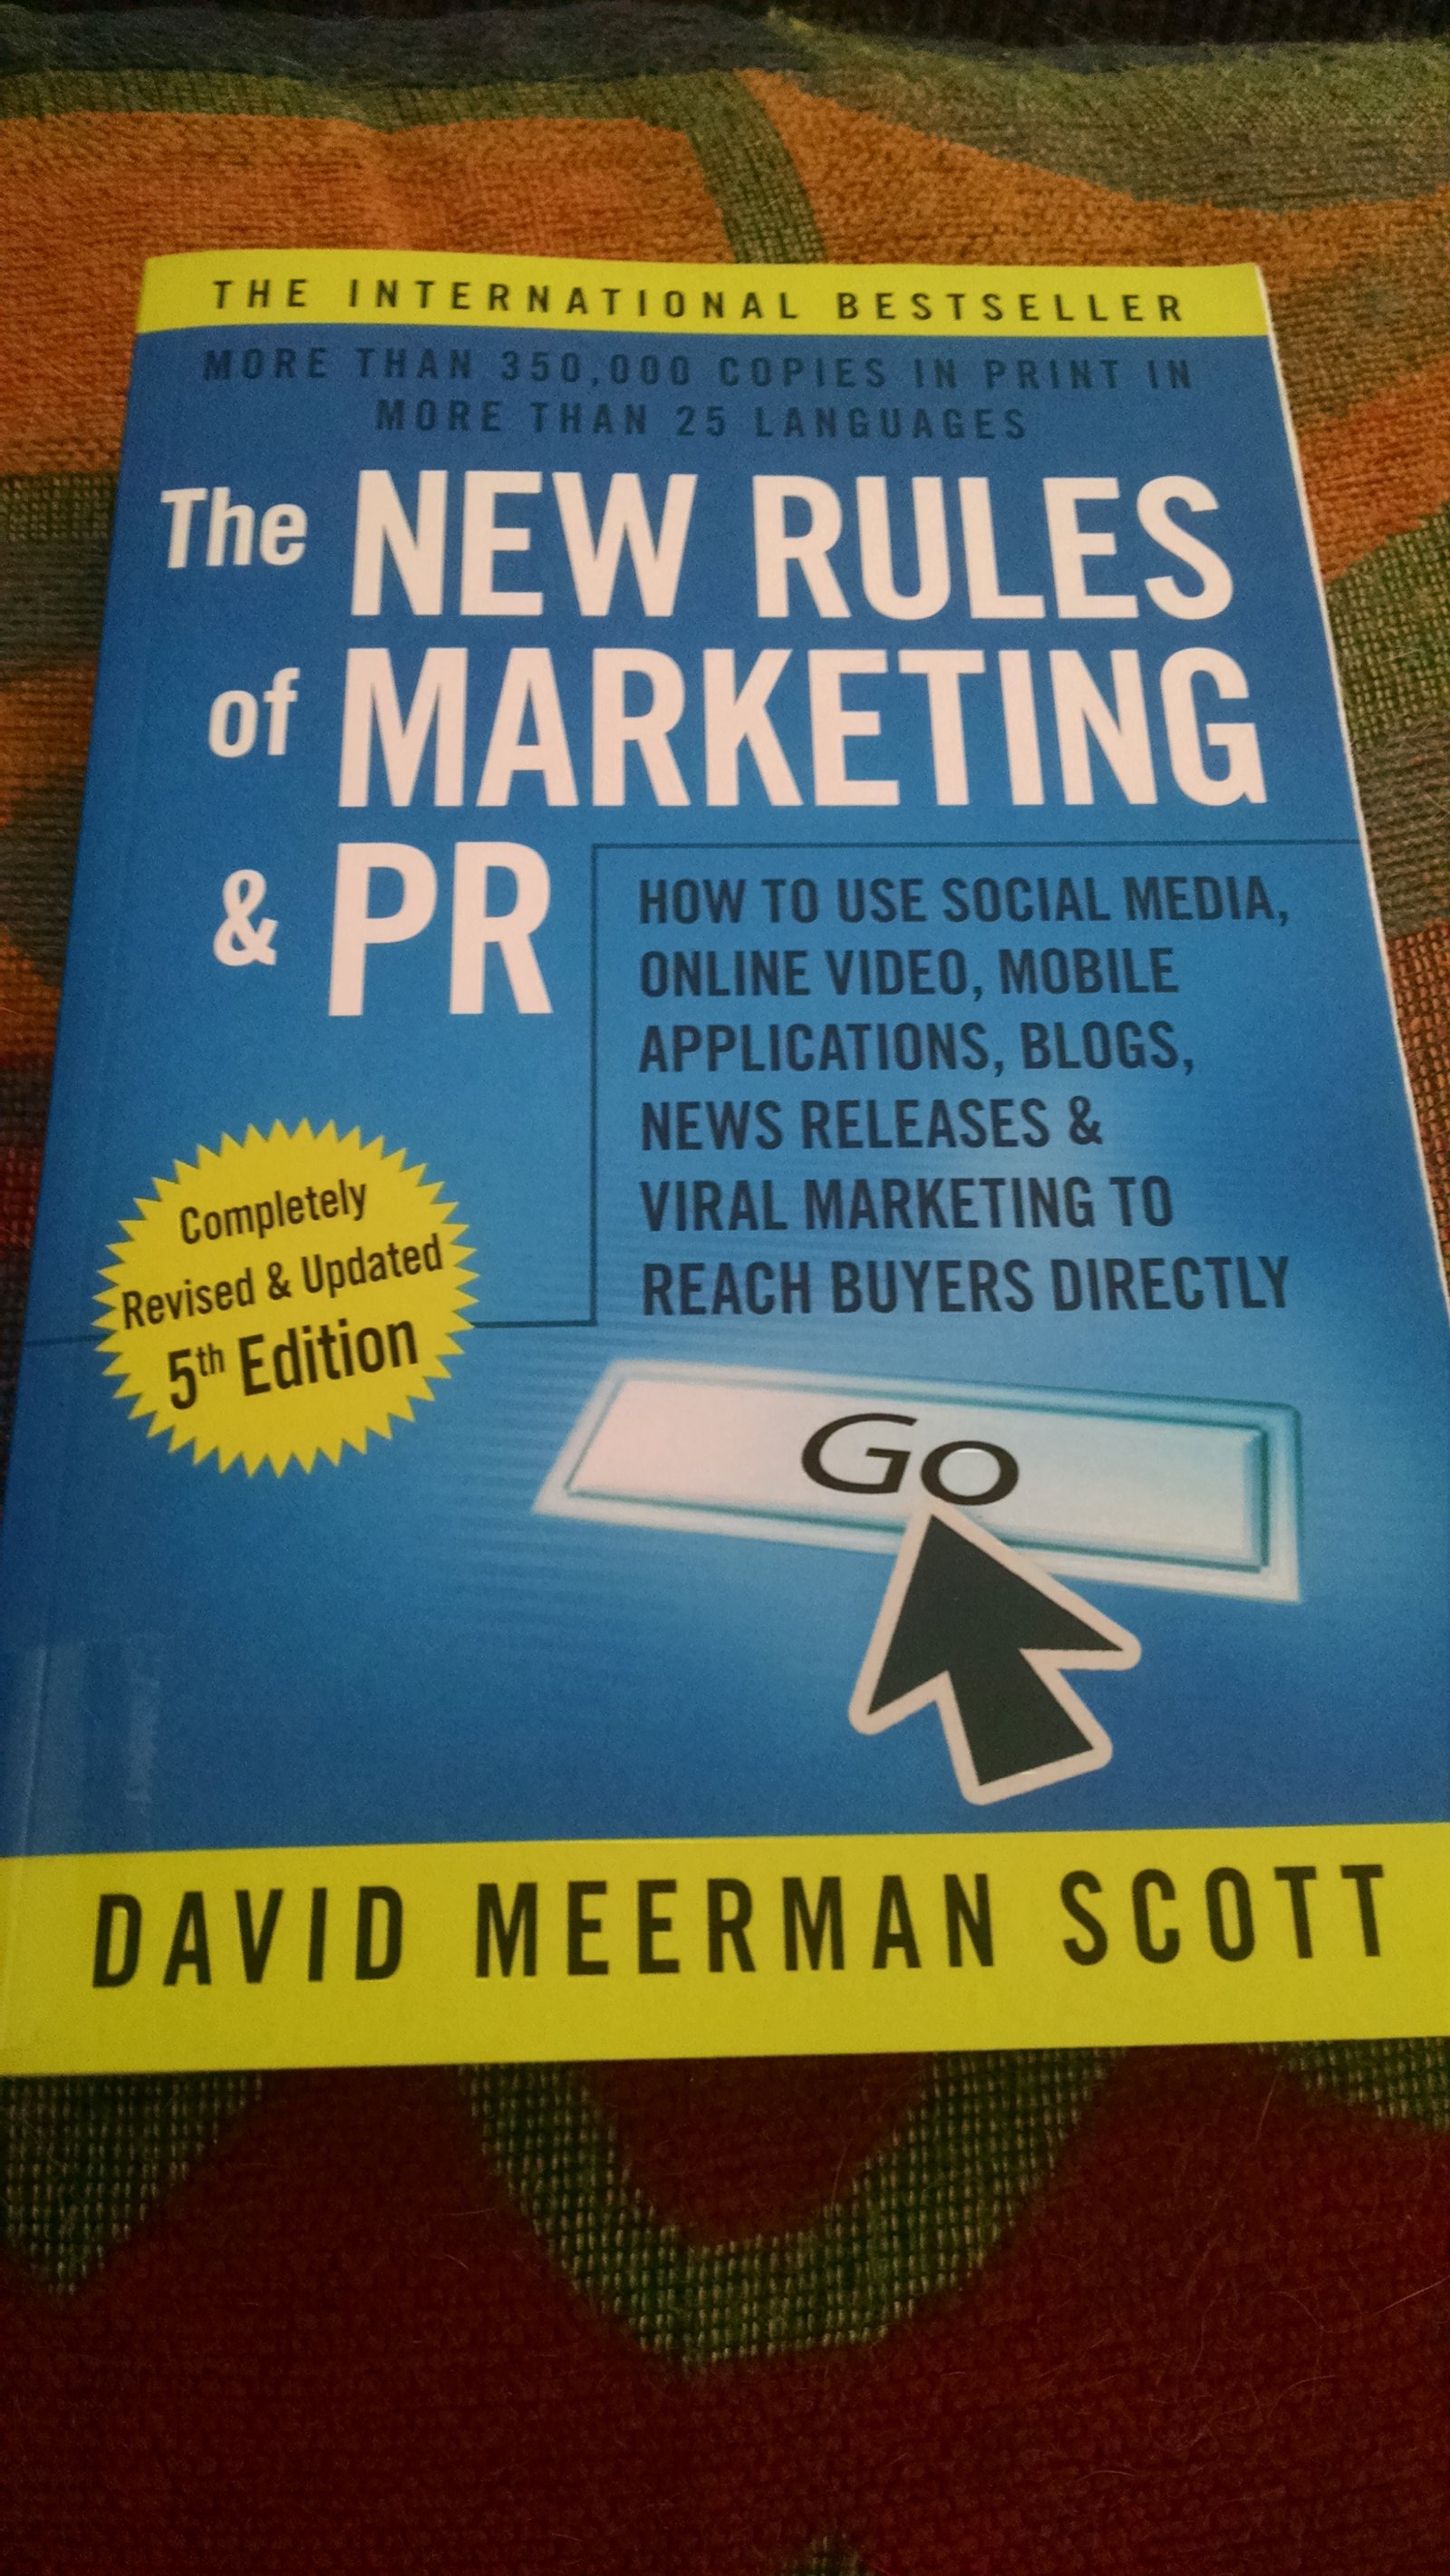 Just Got “The New Rules of Marketing & PR” Book